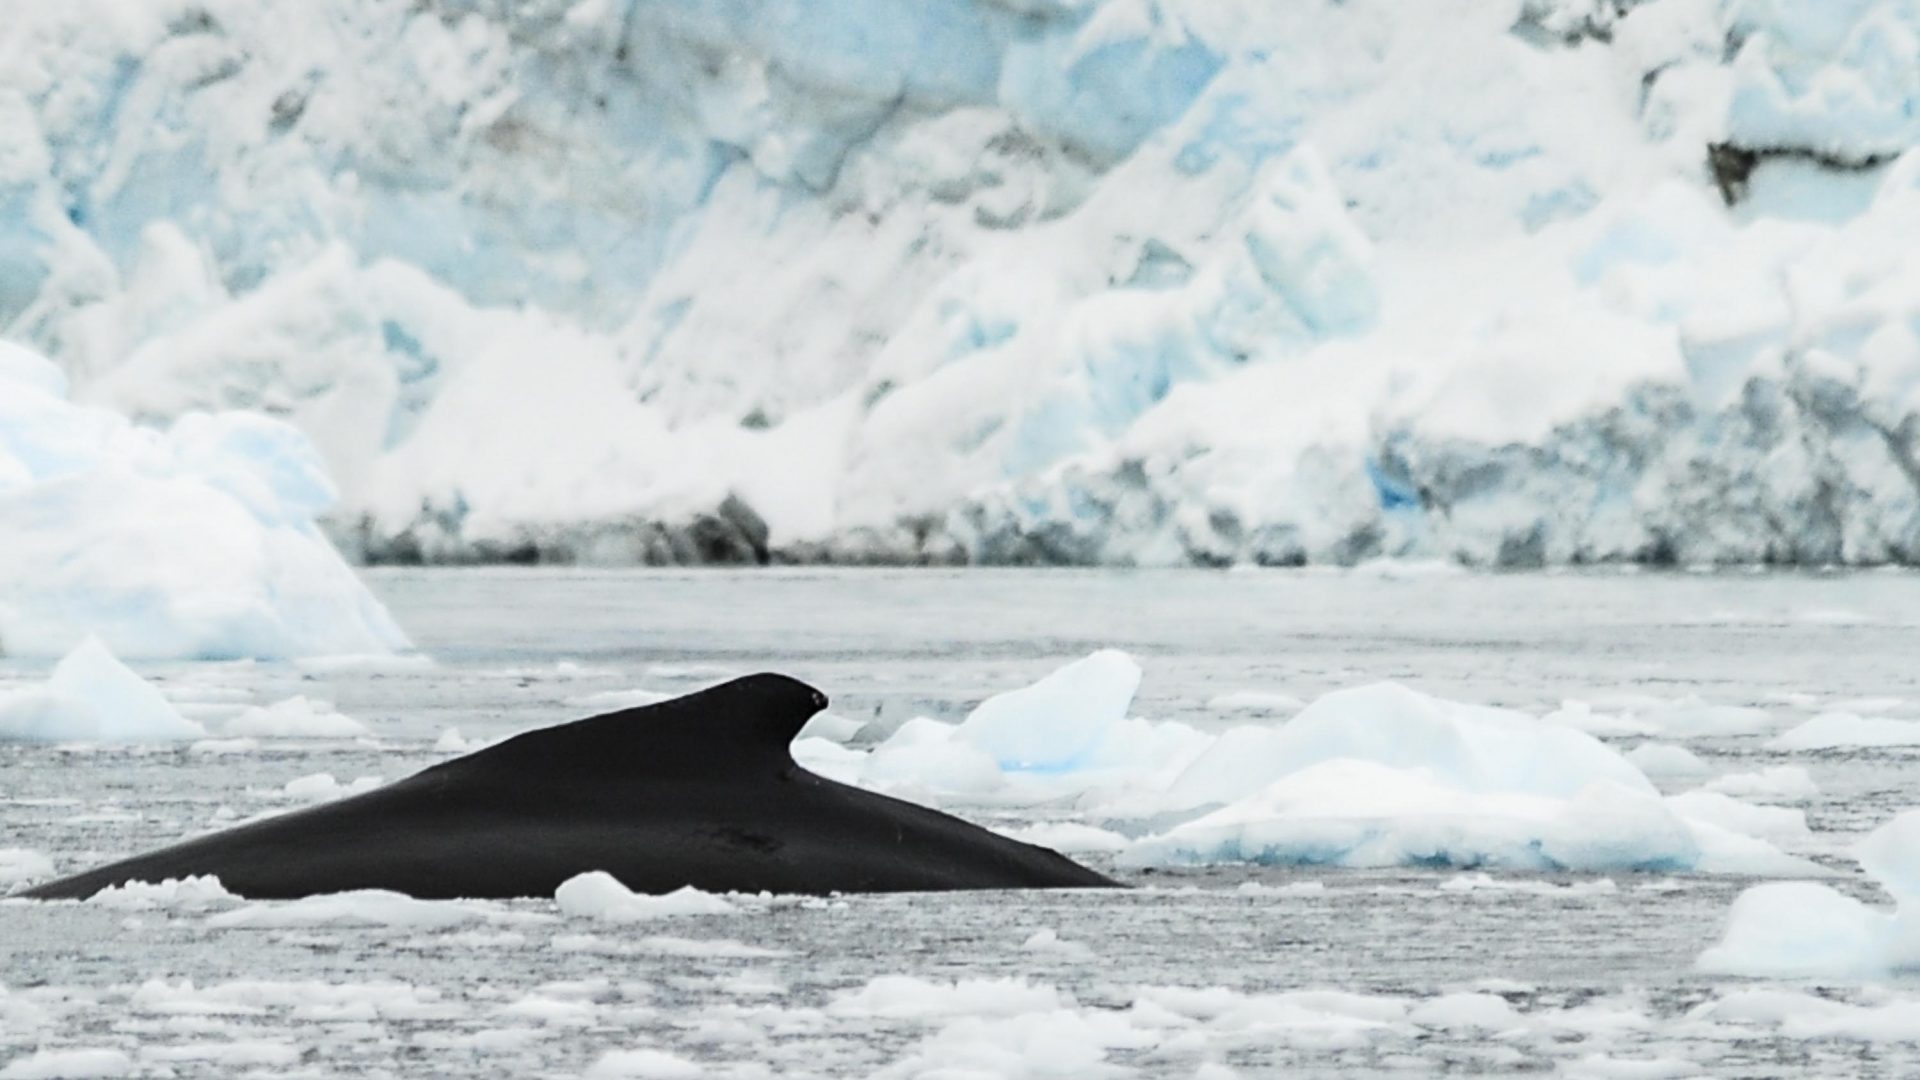 What do whales have to do with fighting the climate crisis?